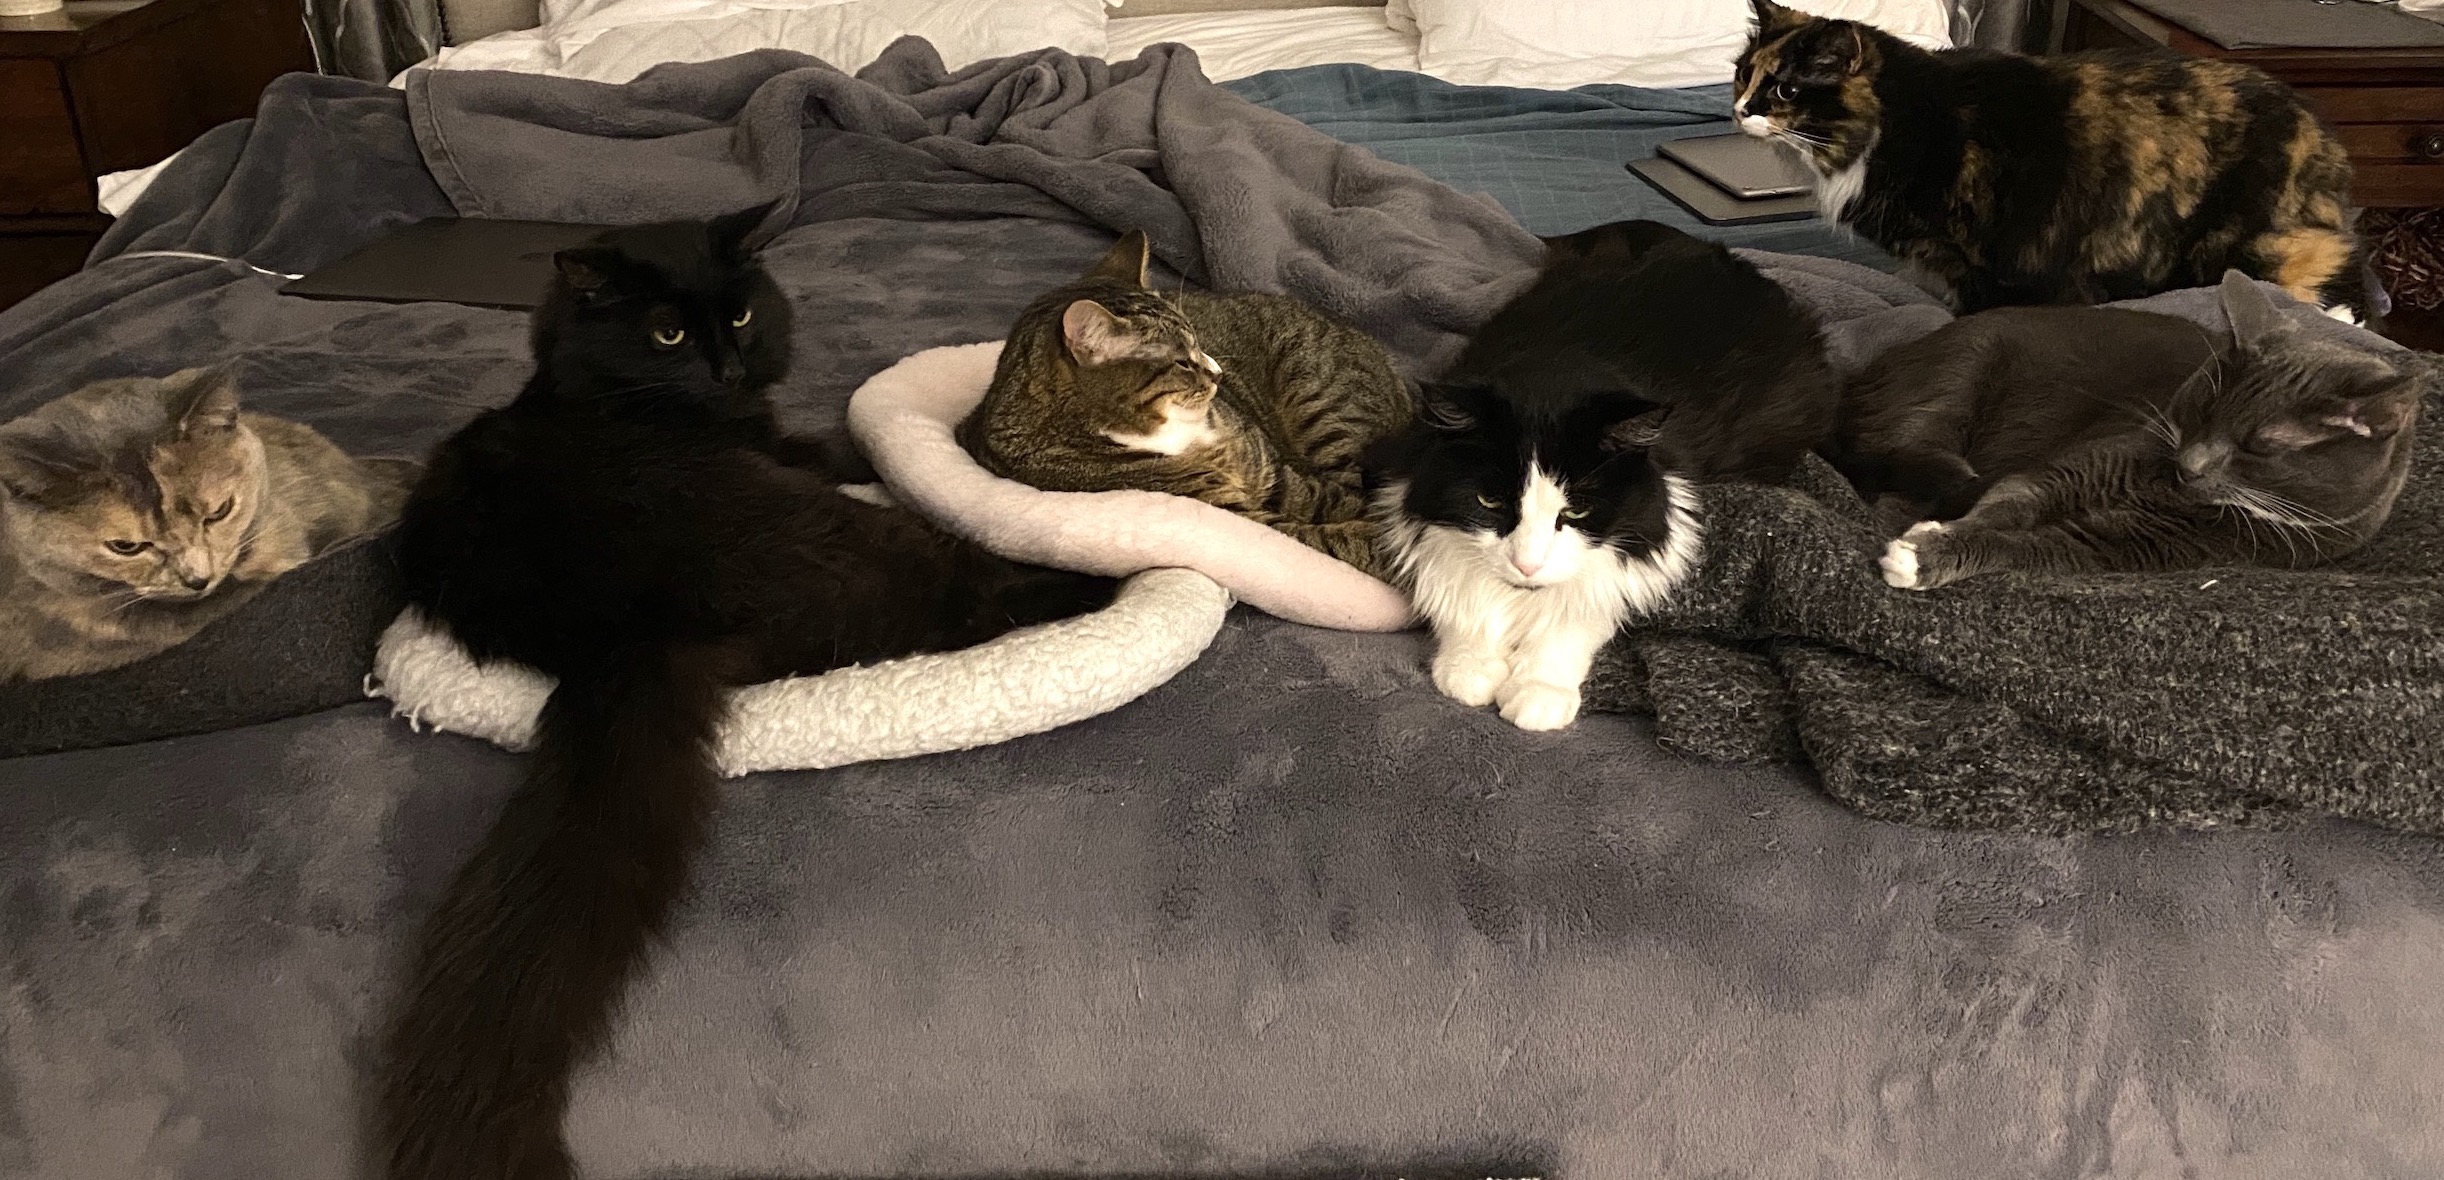 https://www.askamanager.org/wp-content/uploads/2020/07/6-cats-on-bed.jpg